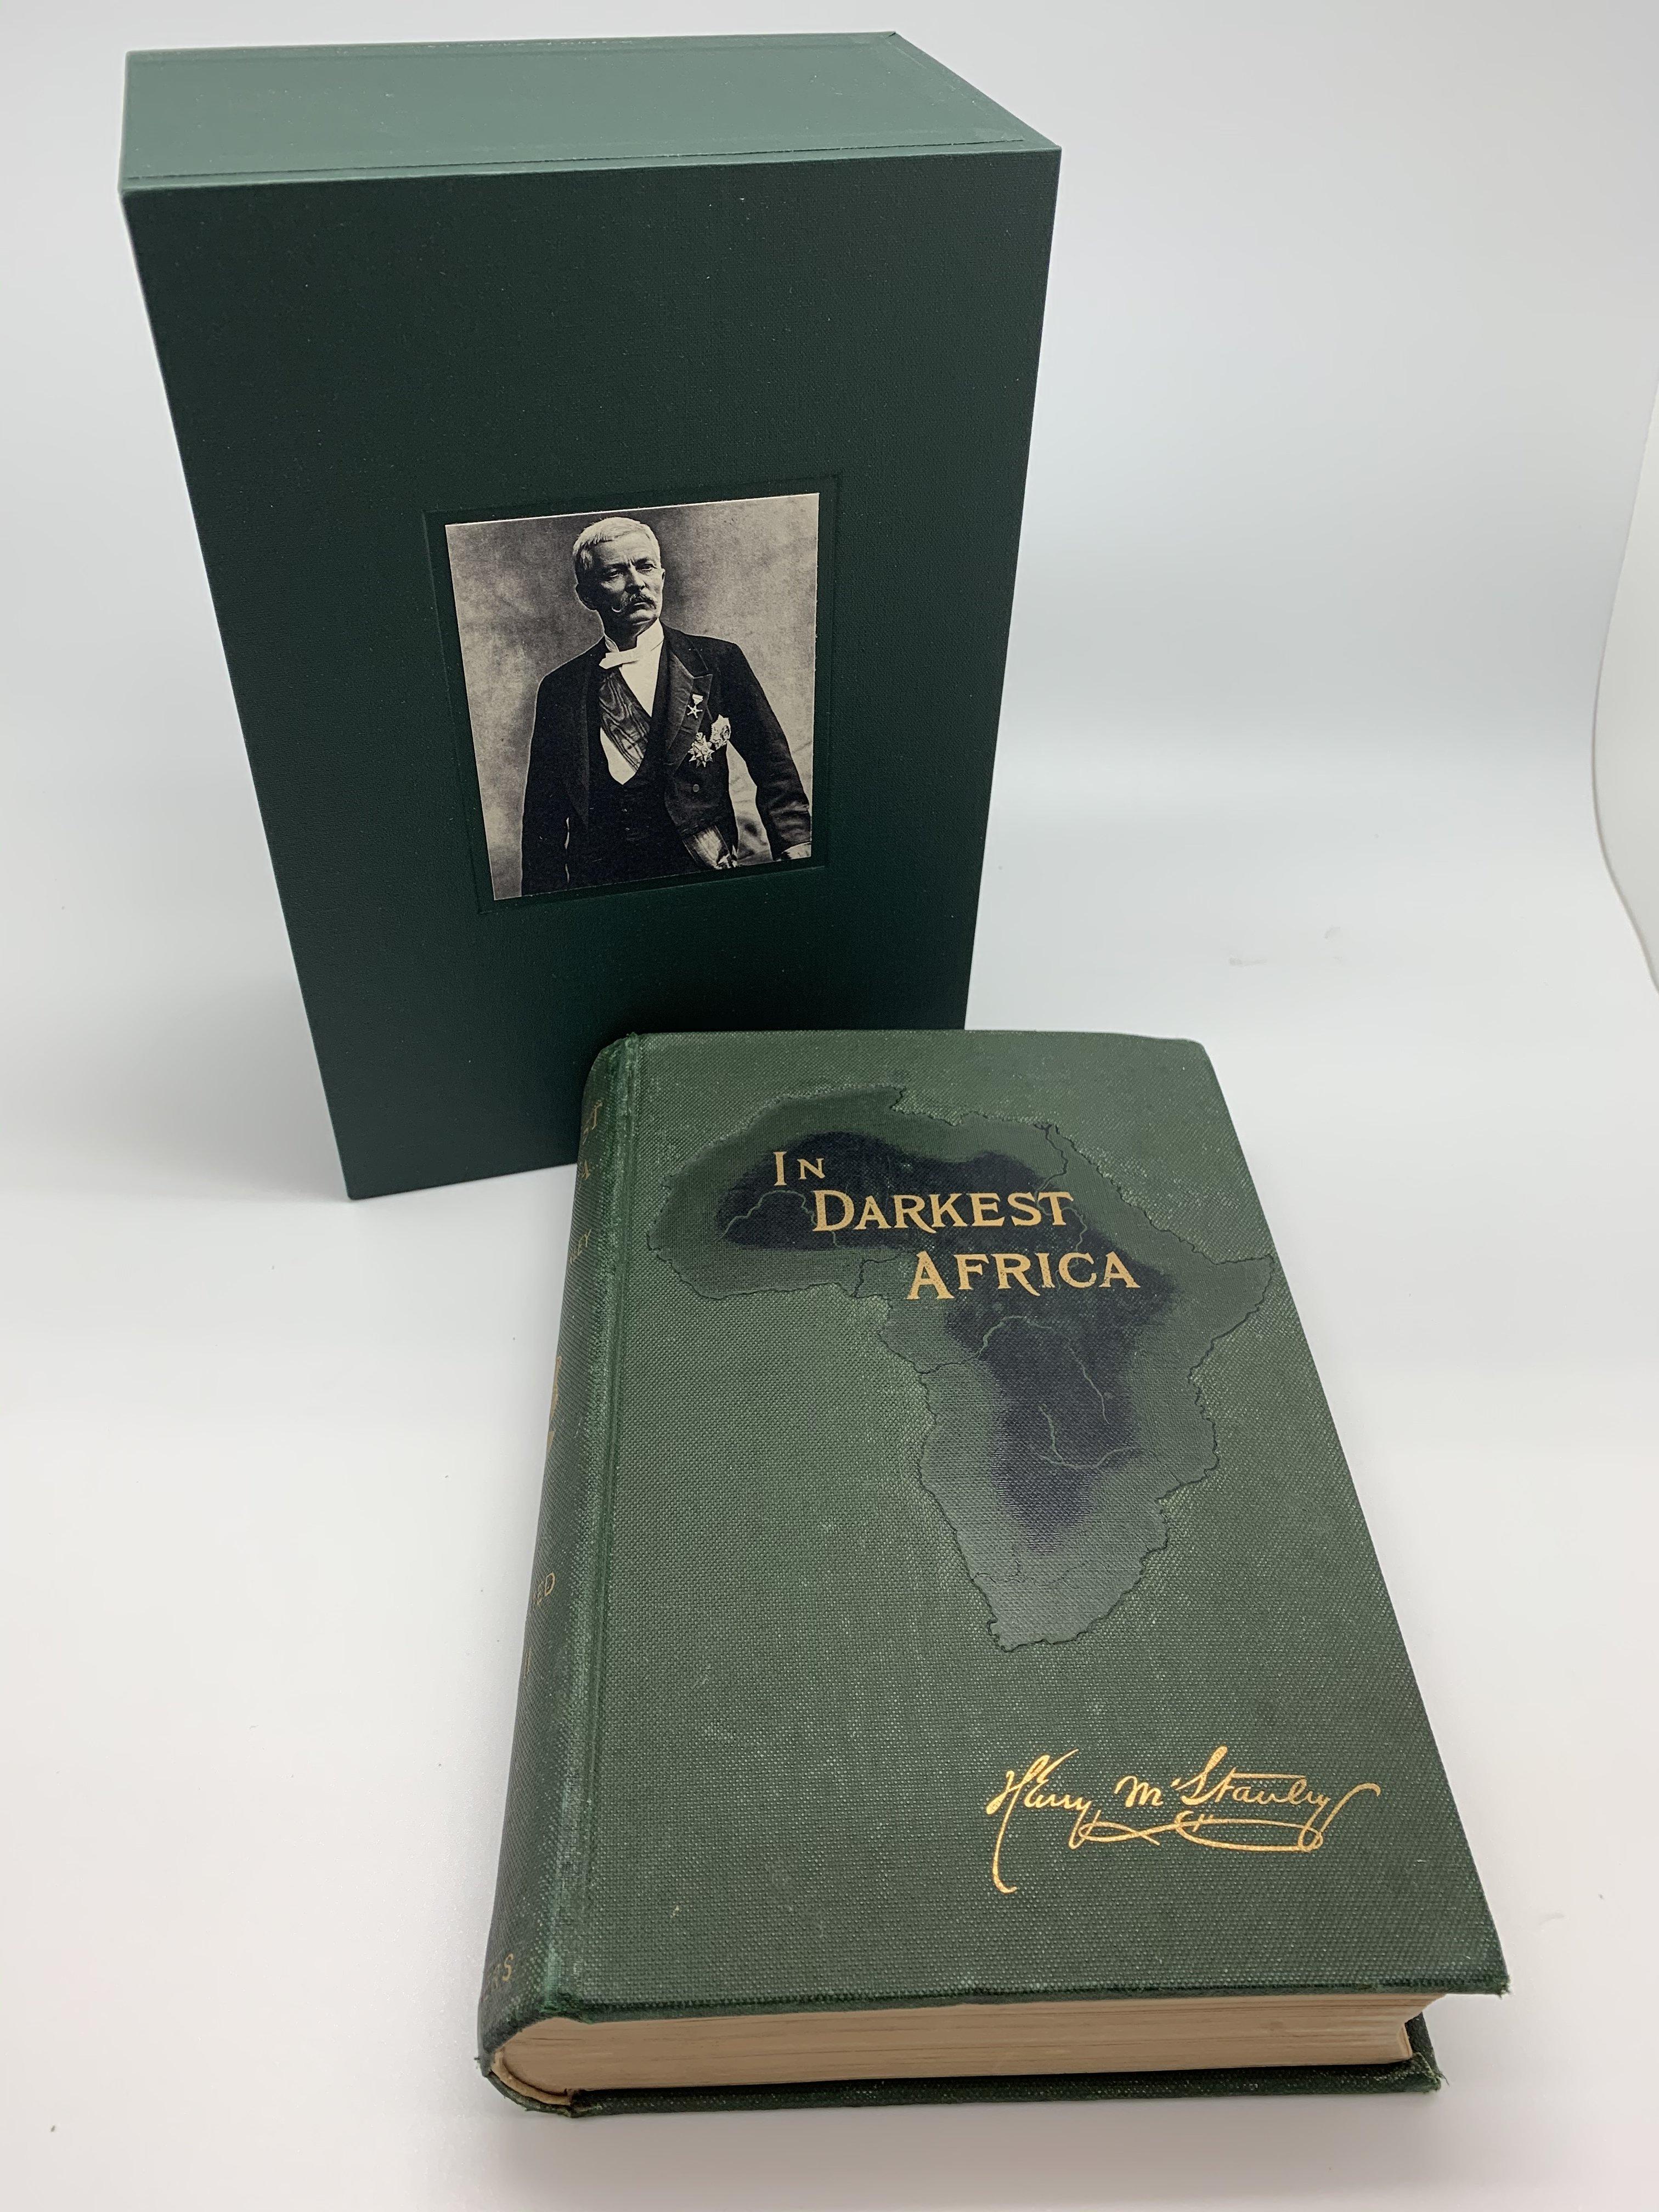 Stanley, Henry M. In Darkest Africa. New York: Charles Scribner’s Sons, 1890. First Trade Edition. Two-volume set in original publisher’s boards. Three folding maps. Housed in matching archival slipcase.

This first trade edition of Henry M.